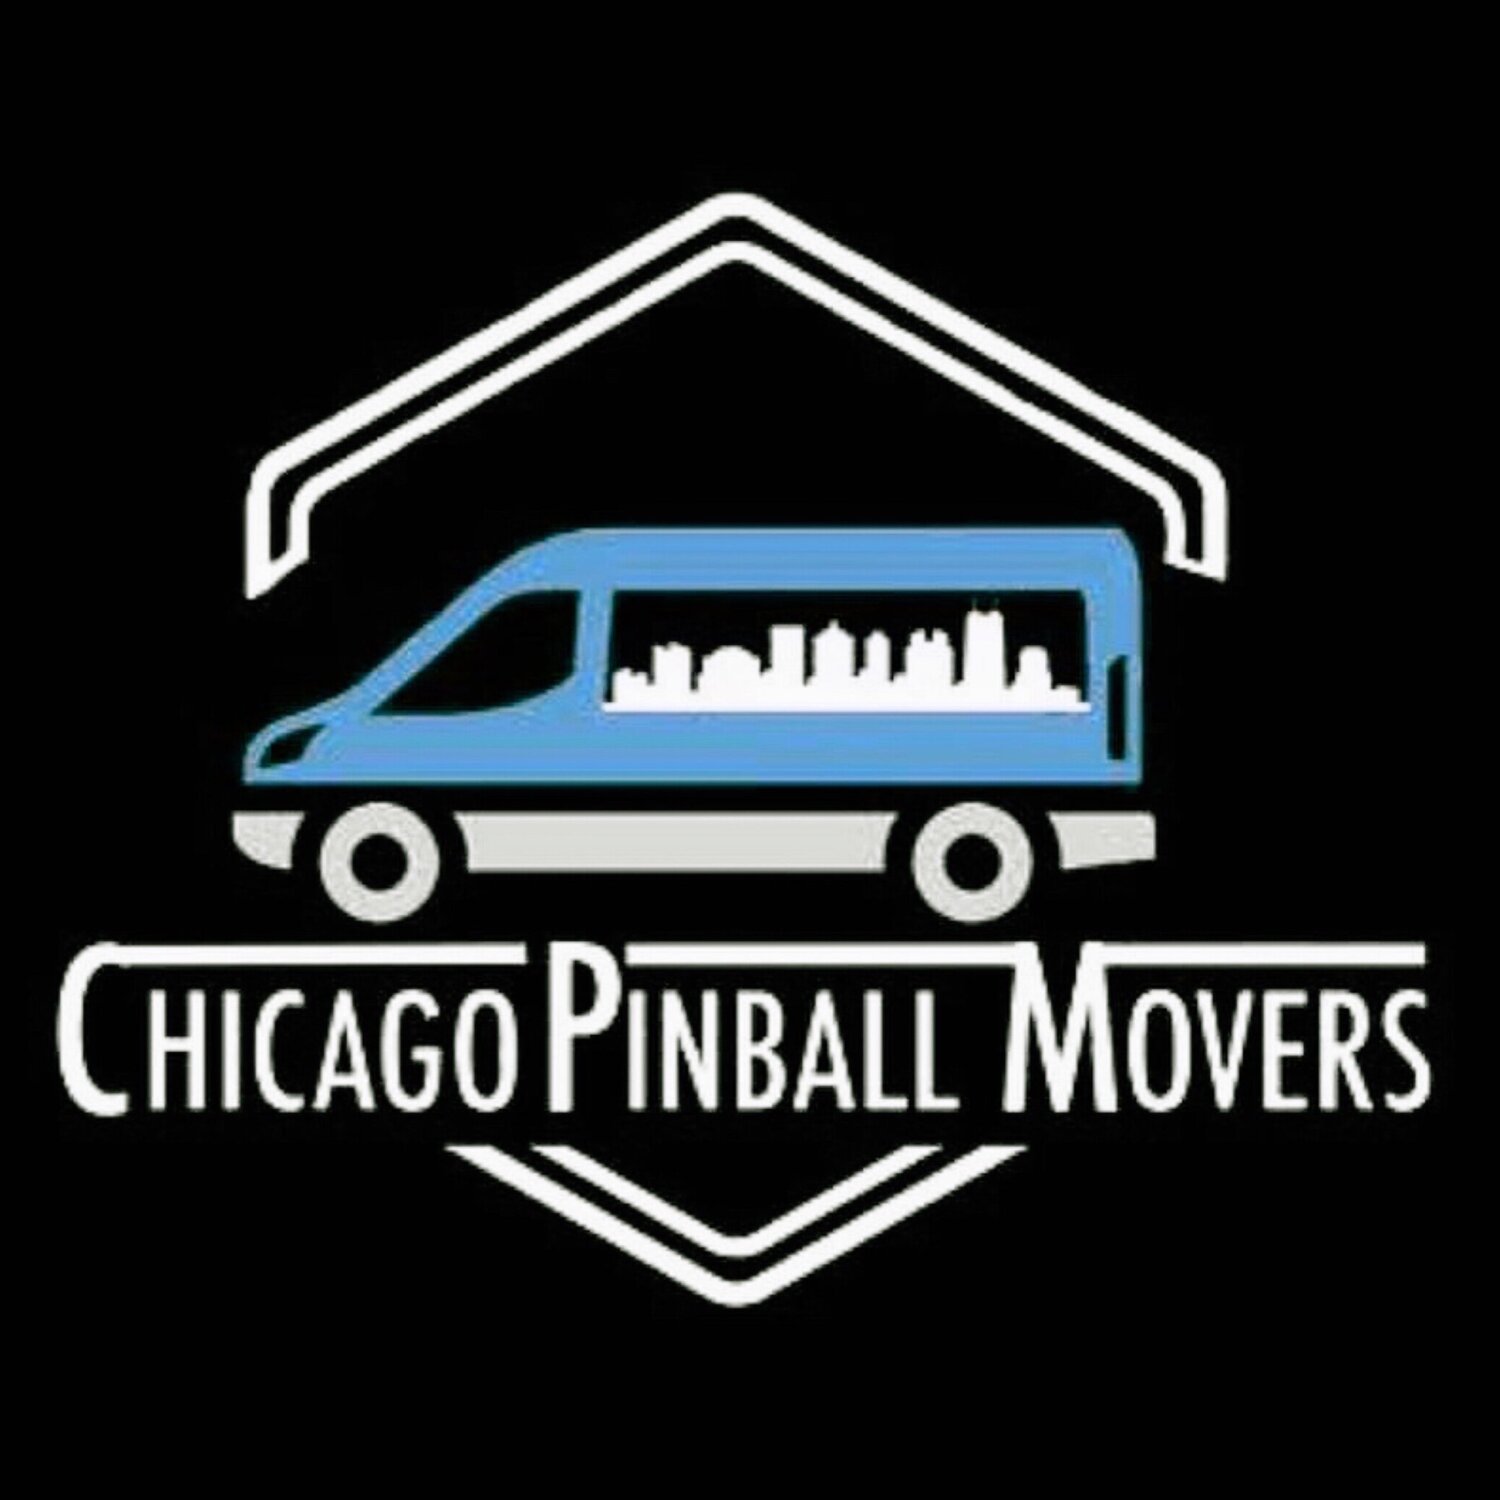 Chicago Pinball Movers